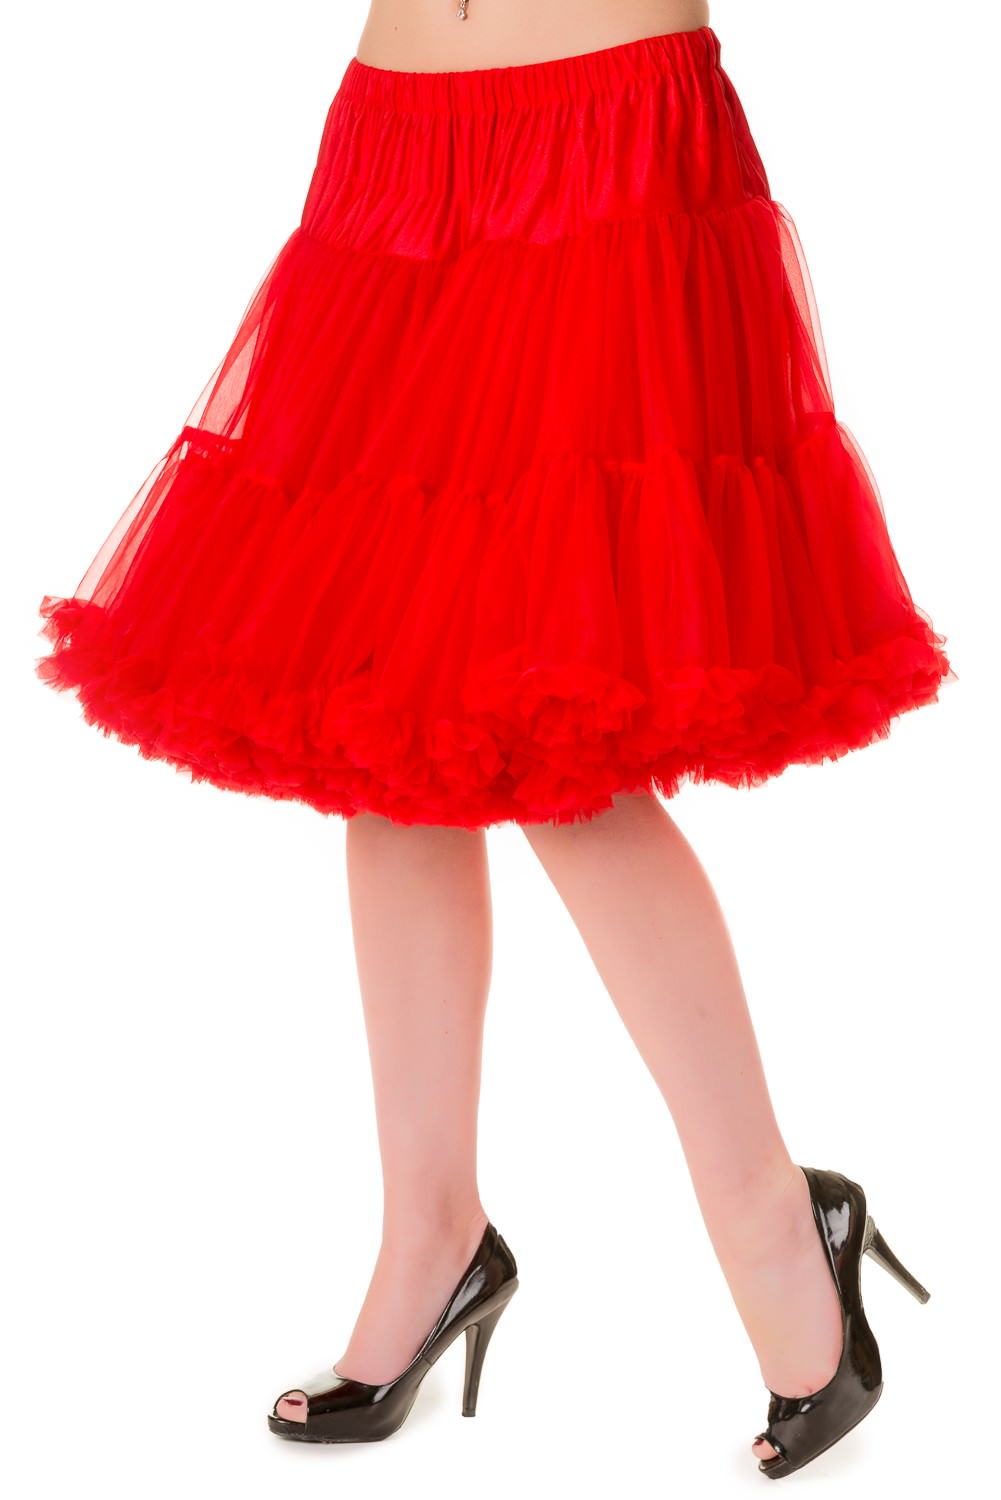 Banned Retro 50s Walkabout Red Petticoat